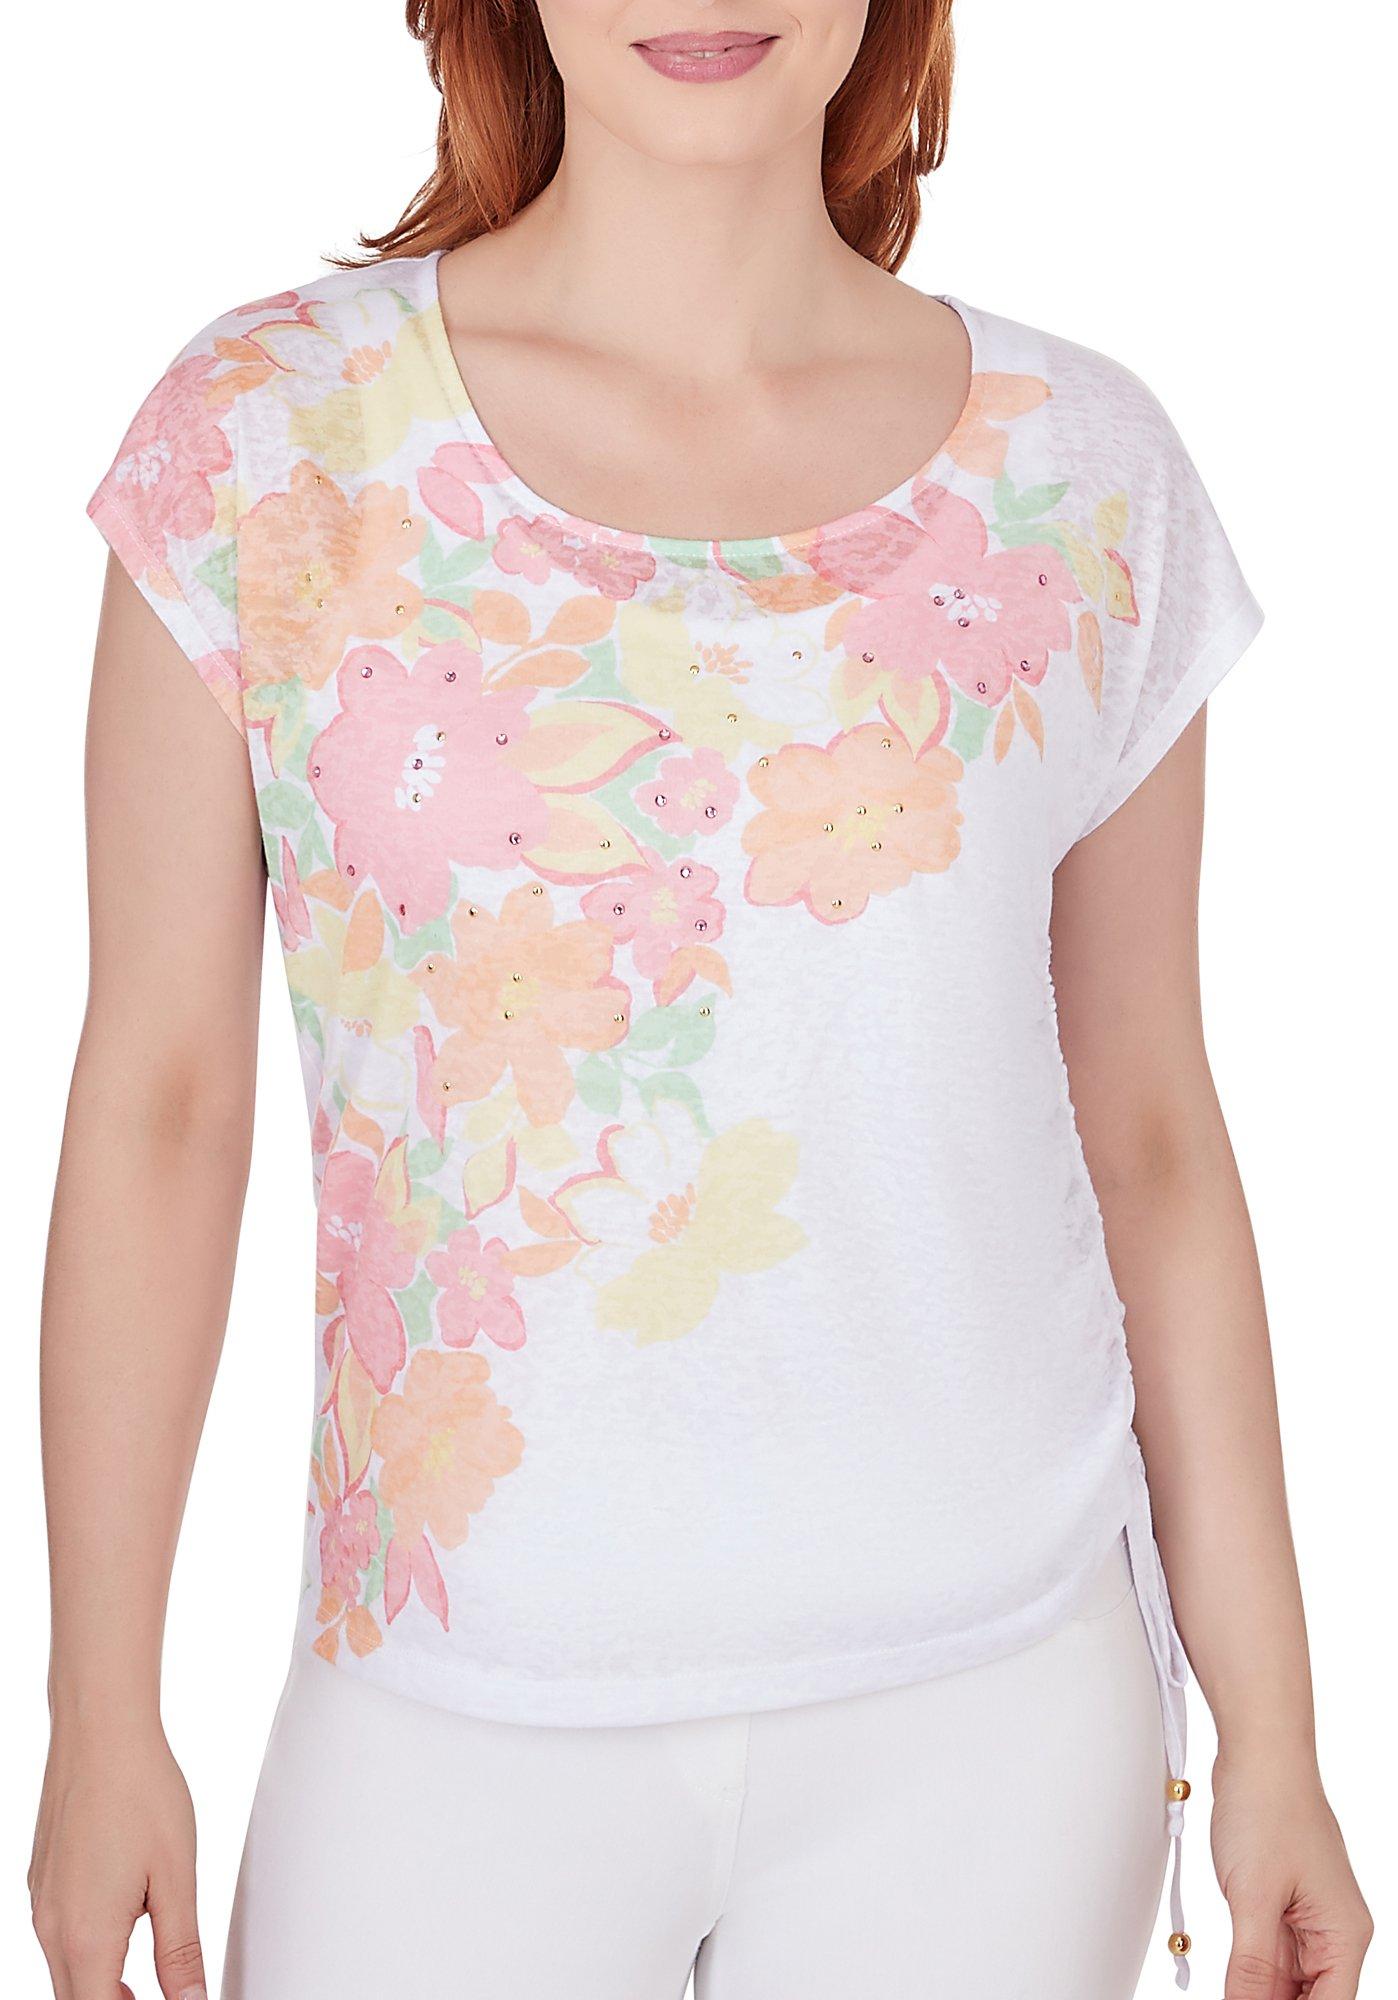 Hearts of Palm Womens Floral Burnout Top